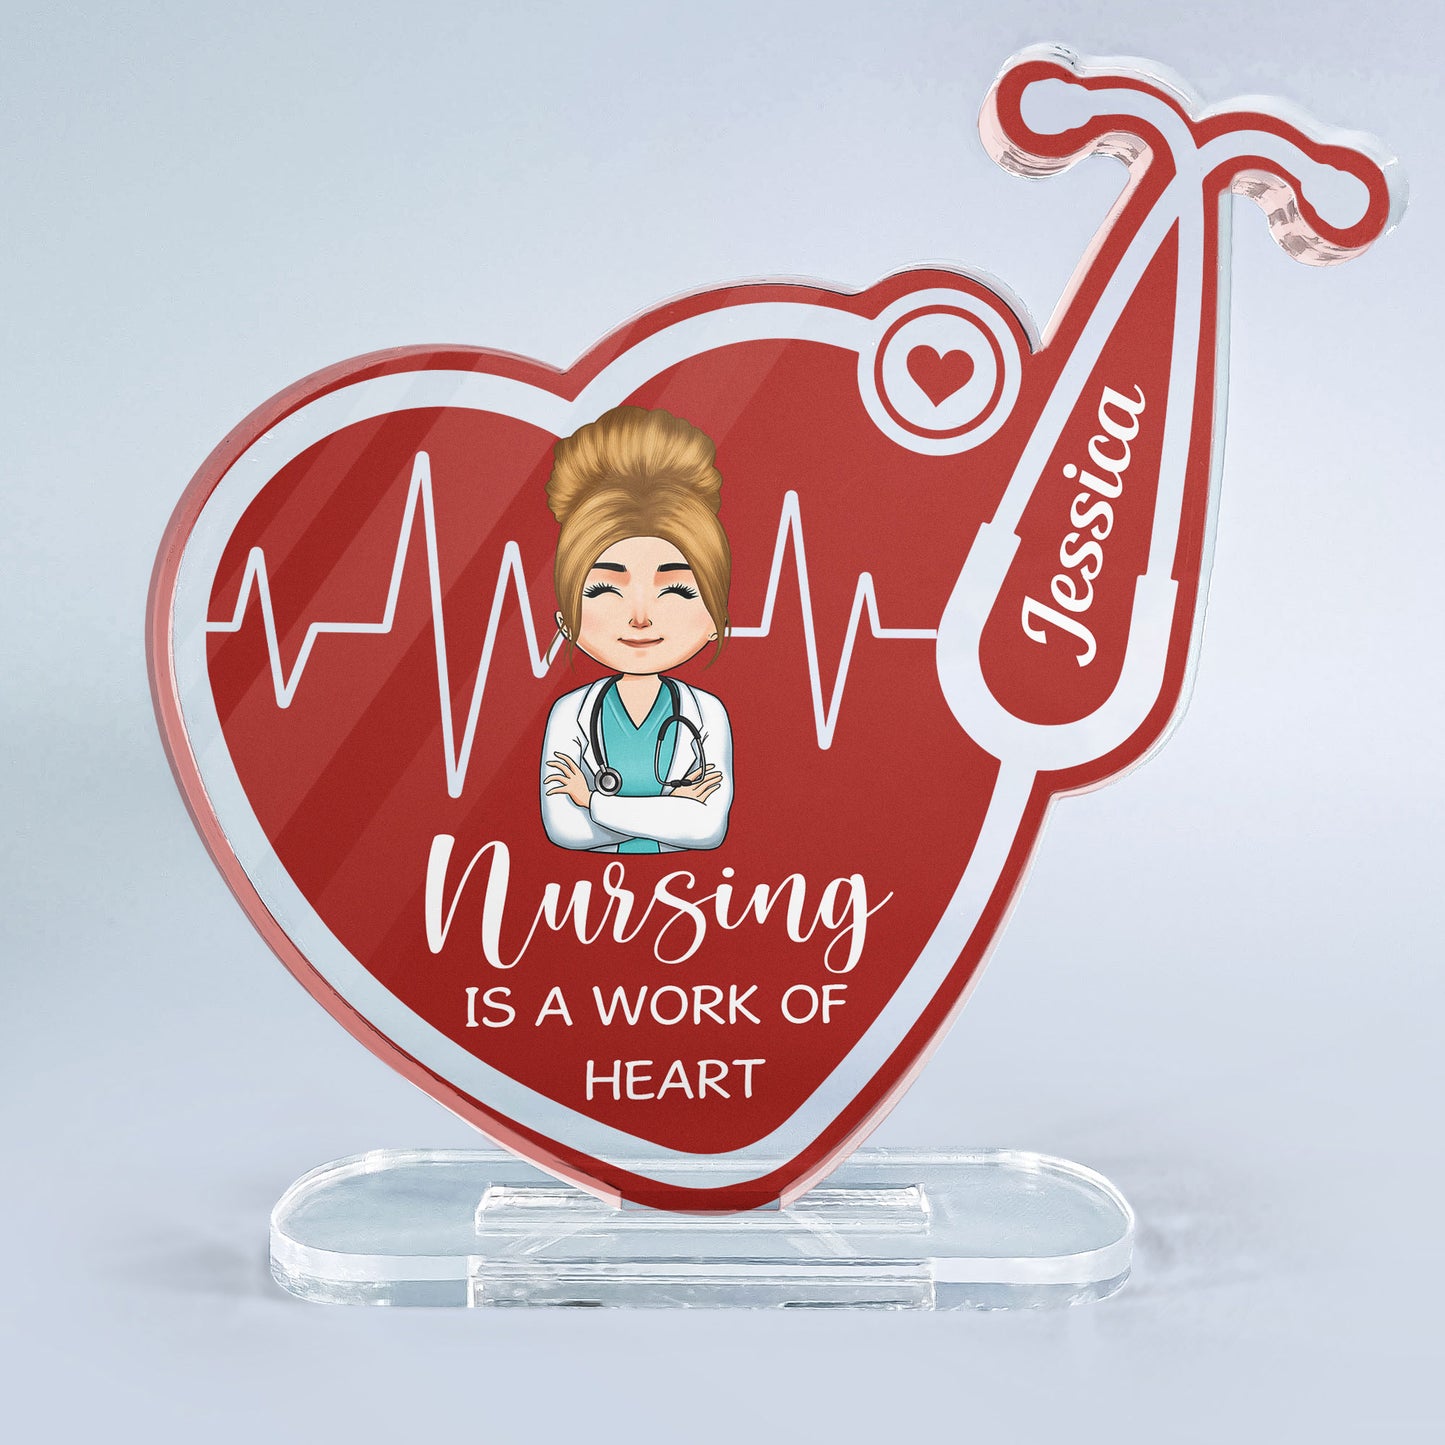 Nursing Is A Work Of Heart - Personalized Stethoscope Shaped Acrylic Plaque - Birthday Gift For Doctor, Nurse